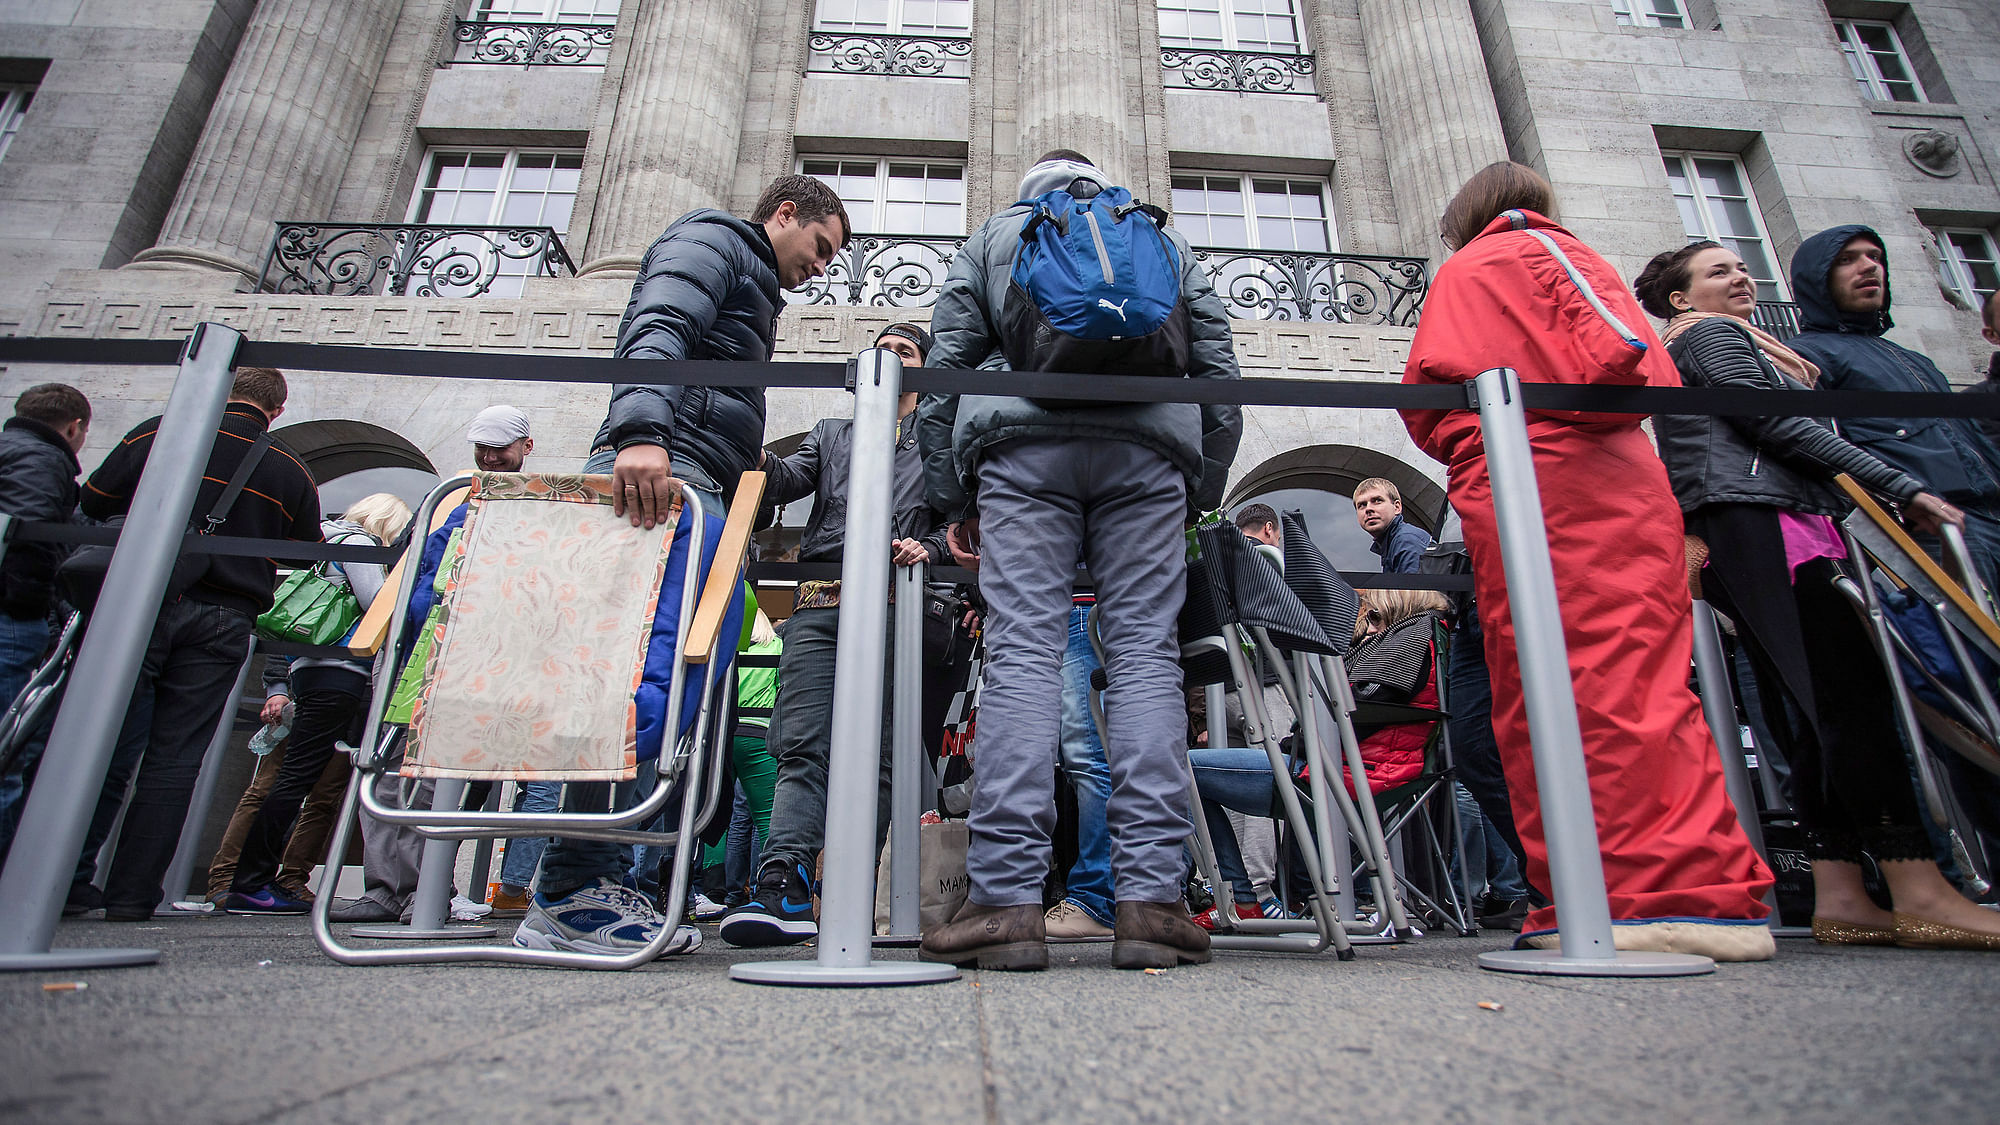 File Photo of customers standing in line outside at the Apple store in Berlin, waiting to buy the iPhone 6. (Photo: Reuters)